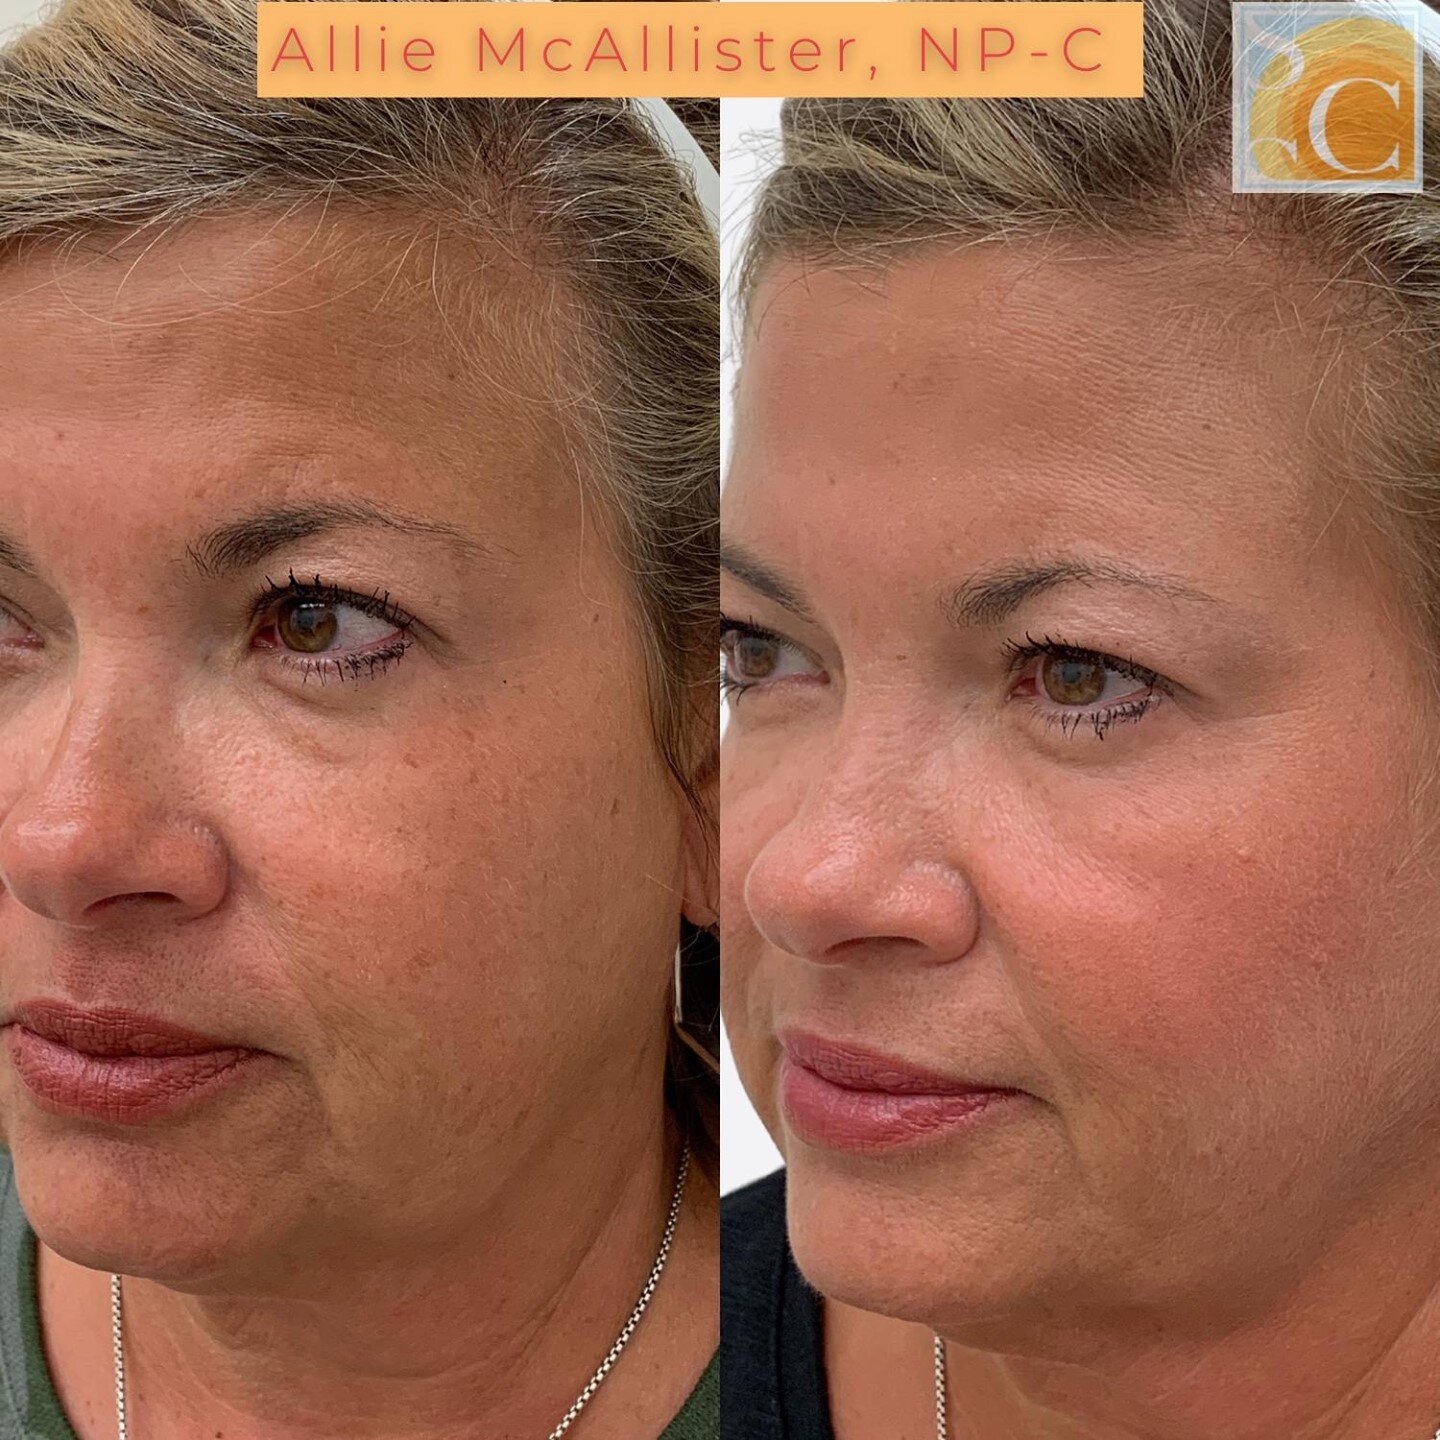 Revolumizing the mid cheek is an upgrade for the whole neighborhood! Look at the undereye improvement from mid cheek and lateral cheek correction! ⁠
⁠
⁠
⁠
💉Mid Face Filler⁠
🖐🏼 Allie McAllister, FNP-C, DCNP⁠
📞 770-422-5557⁠
💻 www.skincancerspecia